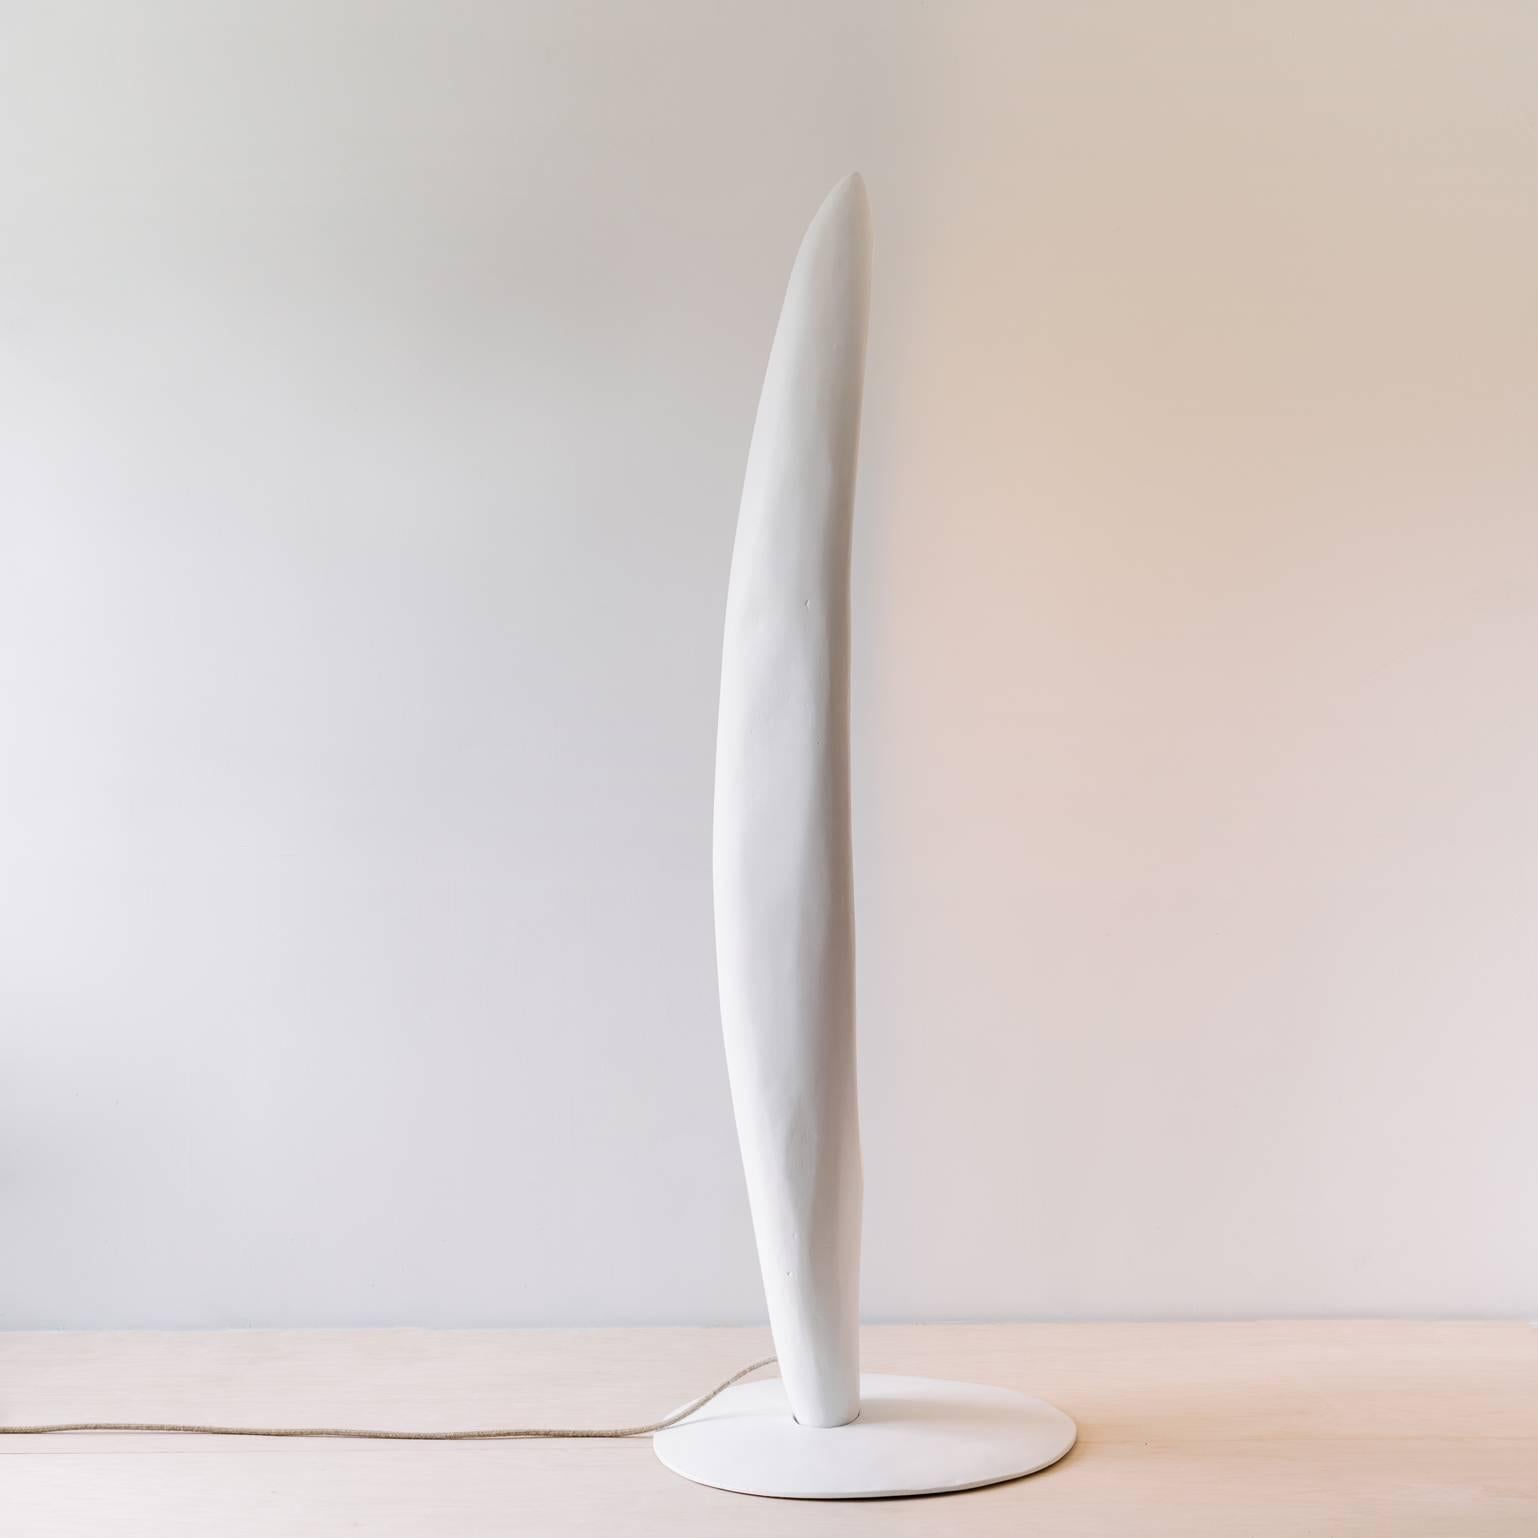 Organic Modern Sculpted Plaster Oyyo Floor Lamp with Rough Hewn Hollow Interior